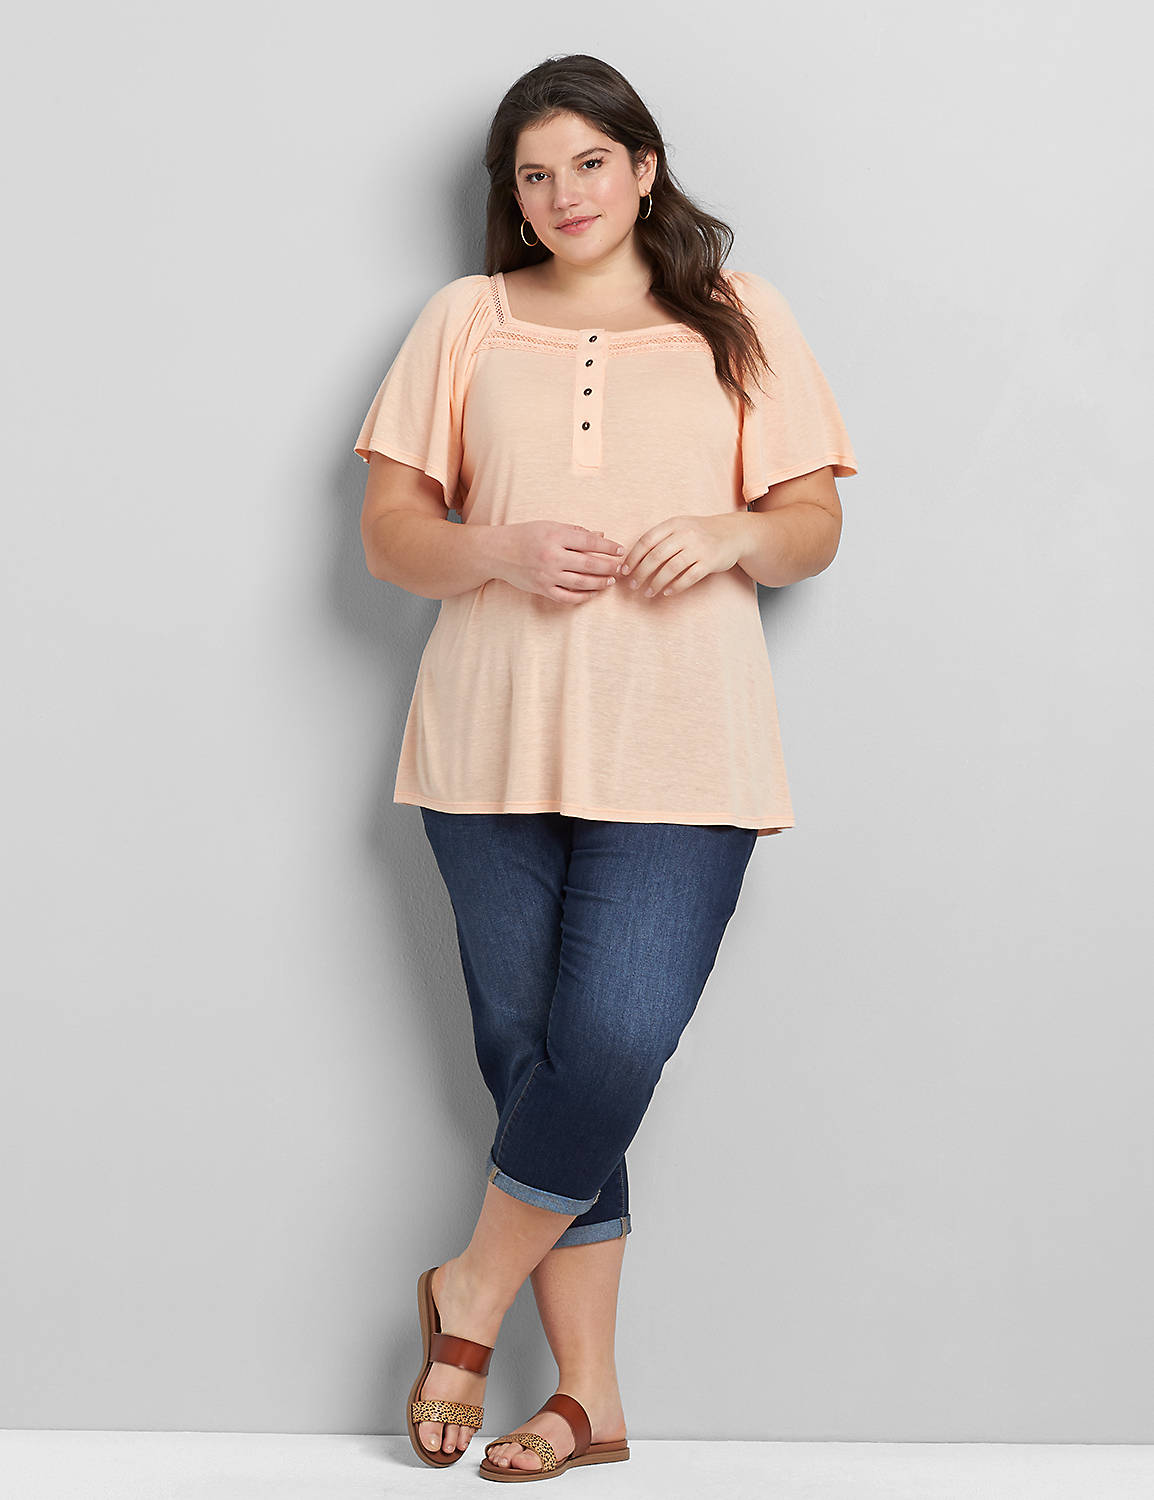 Short Sleeve Elastic Square Neck Top With Buttons 1119620:Sunset Pink Pearl 40-0005-11:18/20 Product Image 3